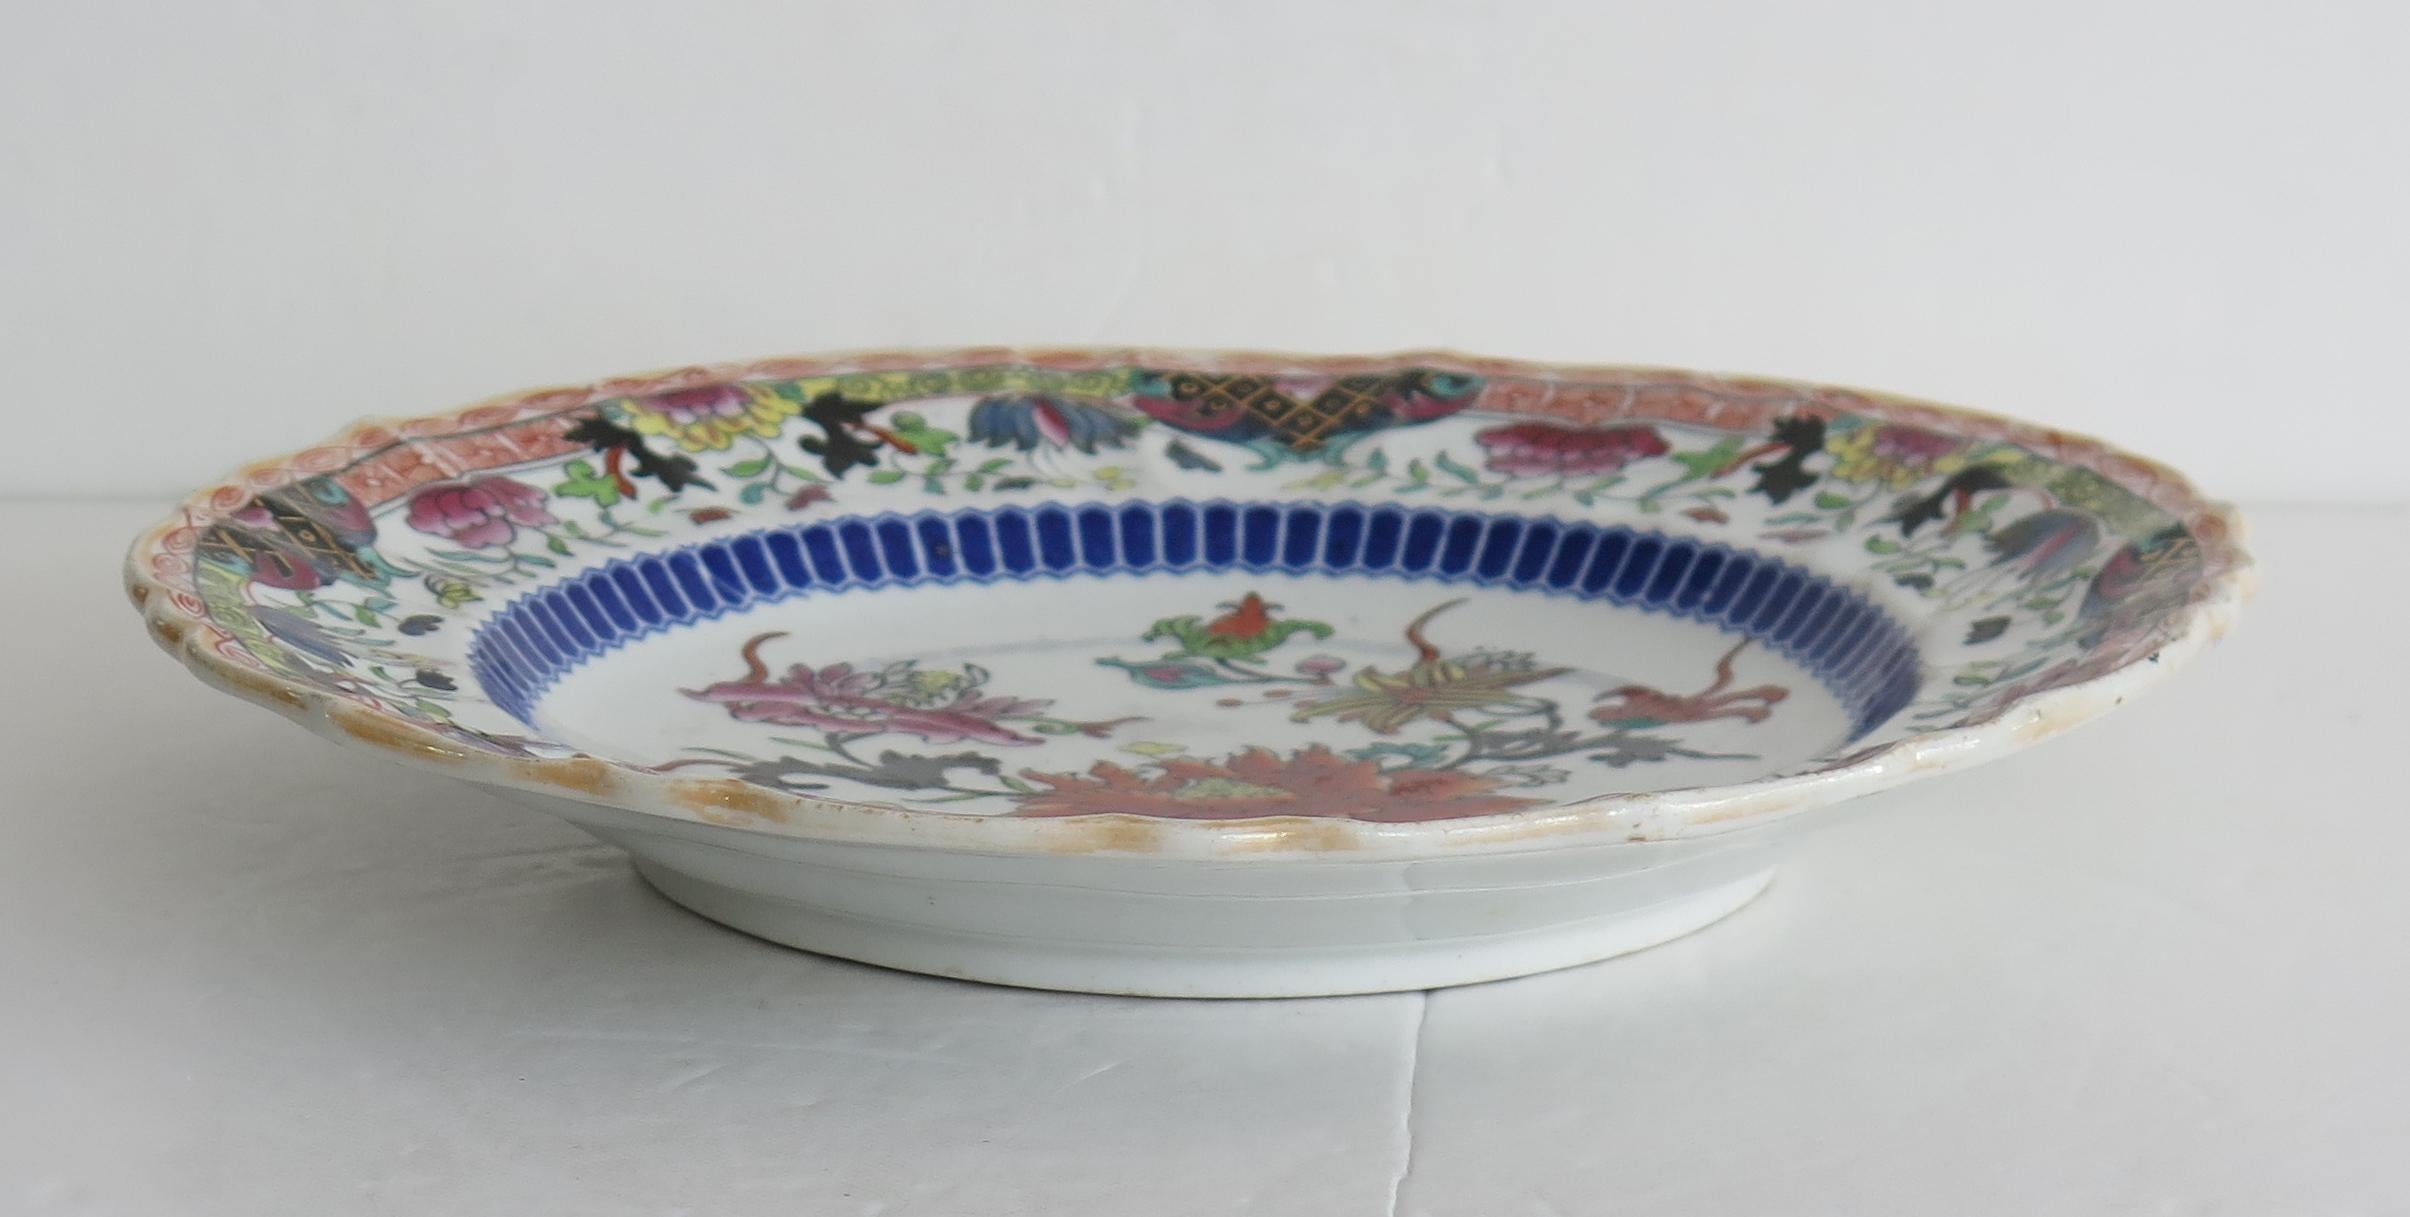 Hand-Painted Early 19th Century Masons Ironstone Desert Plate in Ragged Rose Ptn, Circa 1825